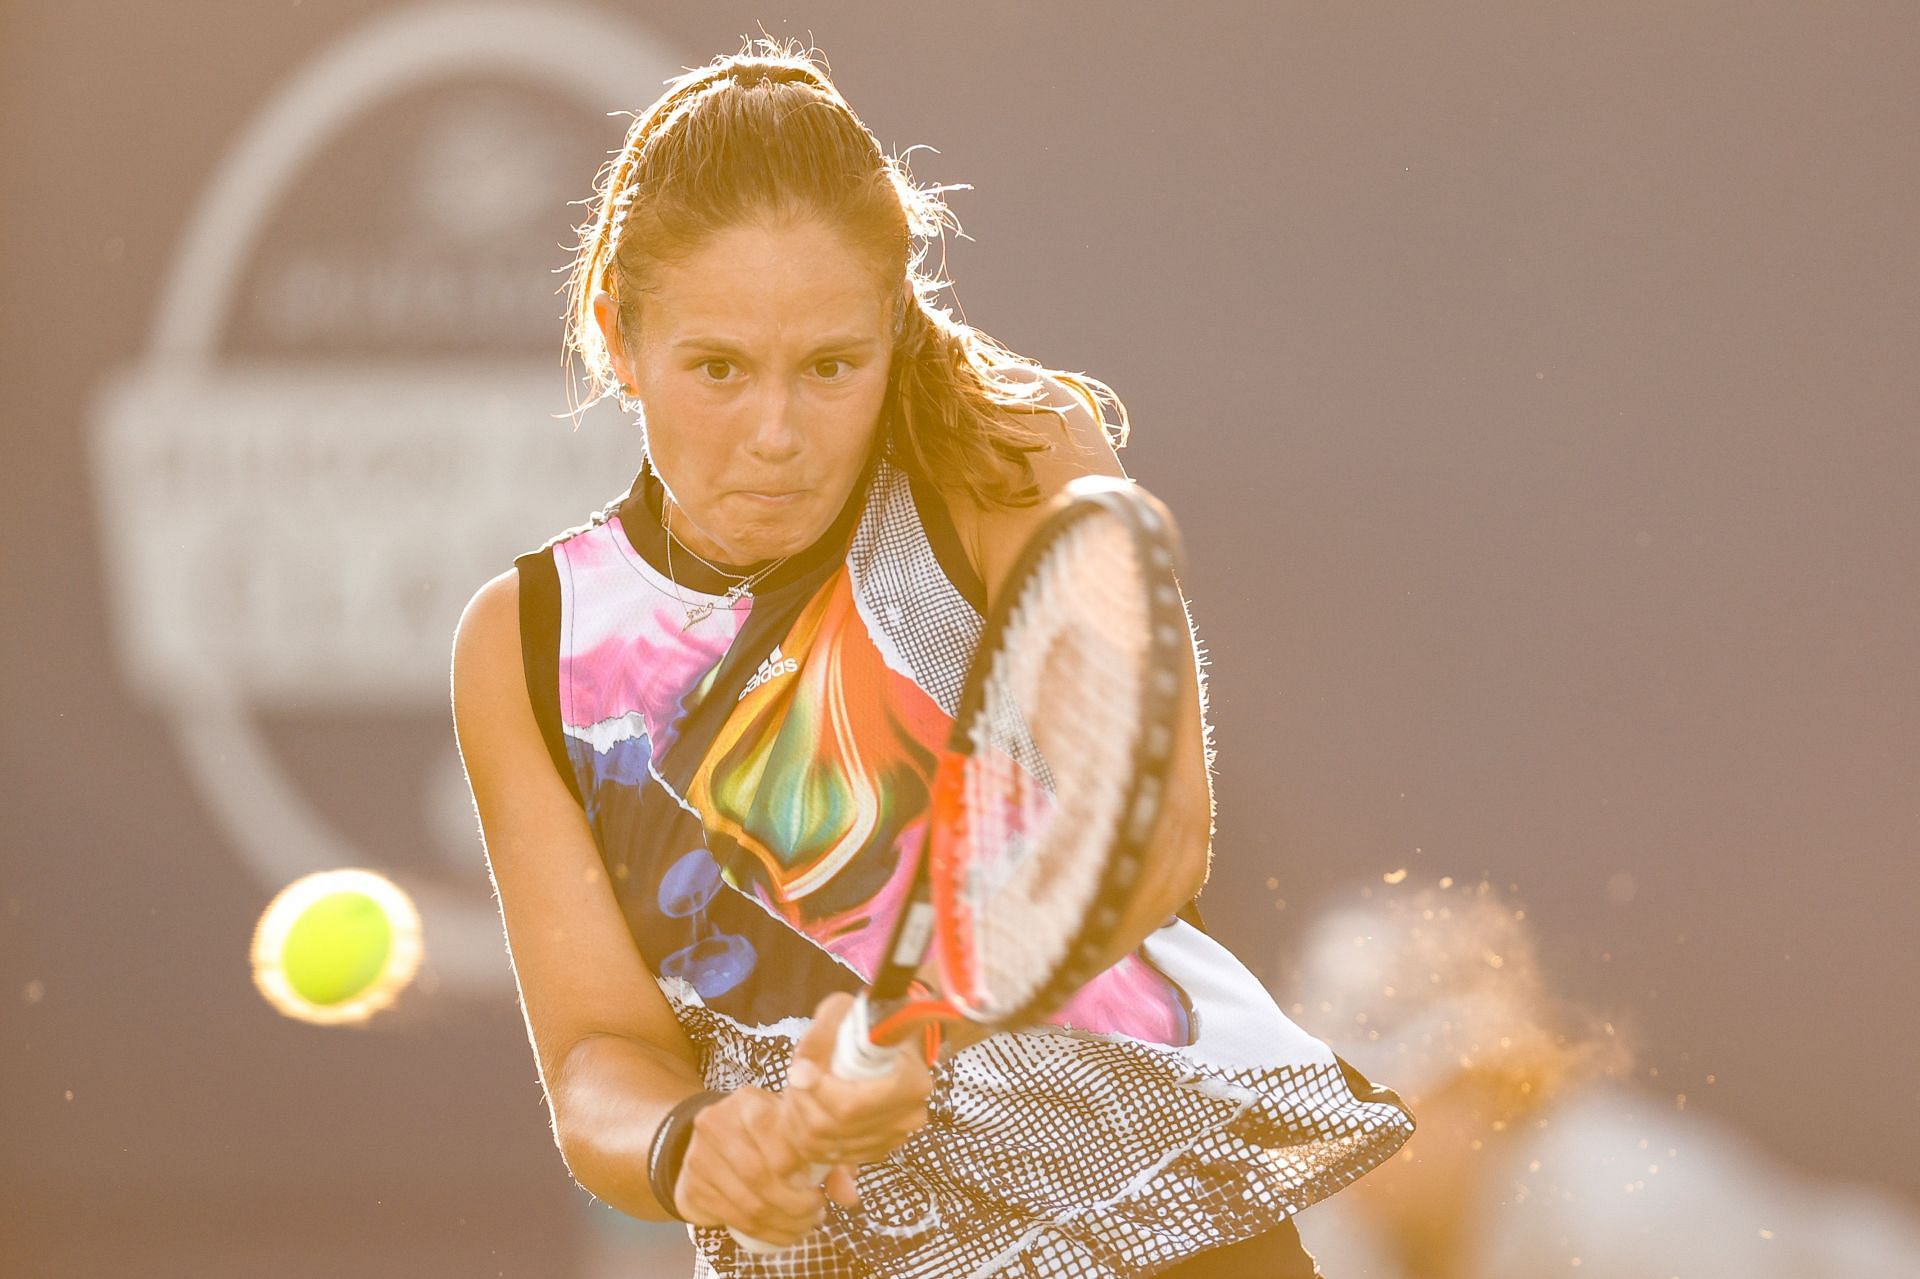 Daria Kasatkina will look to win her first title of the season